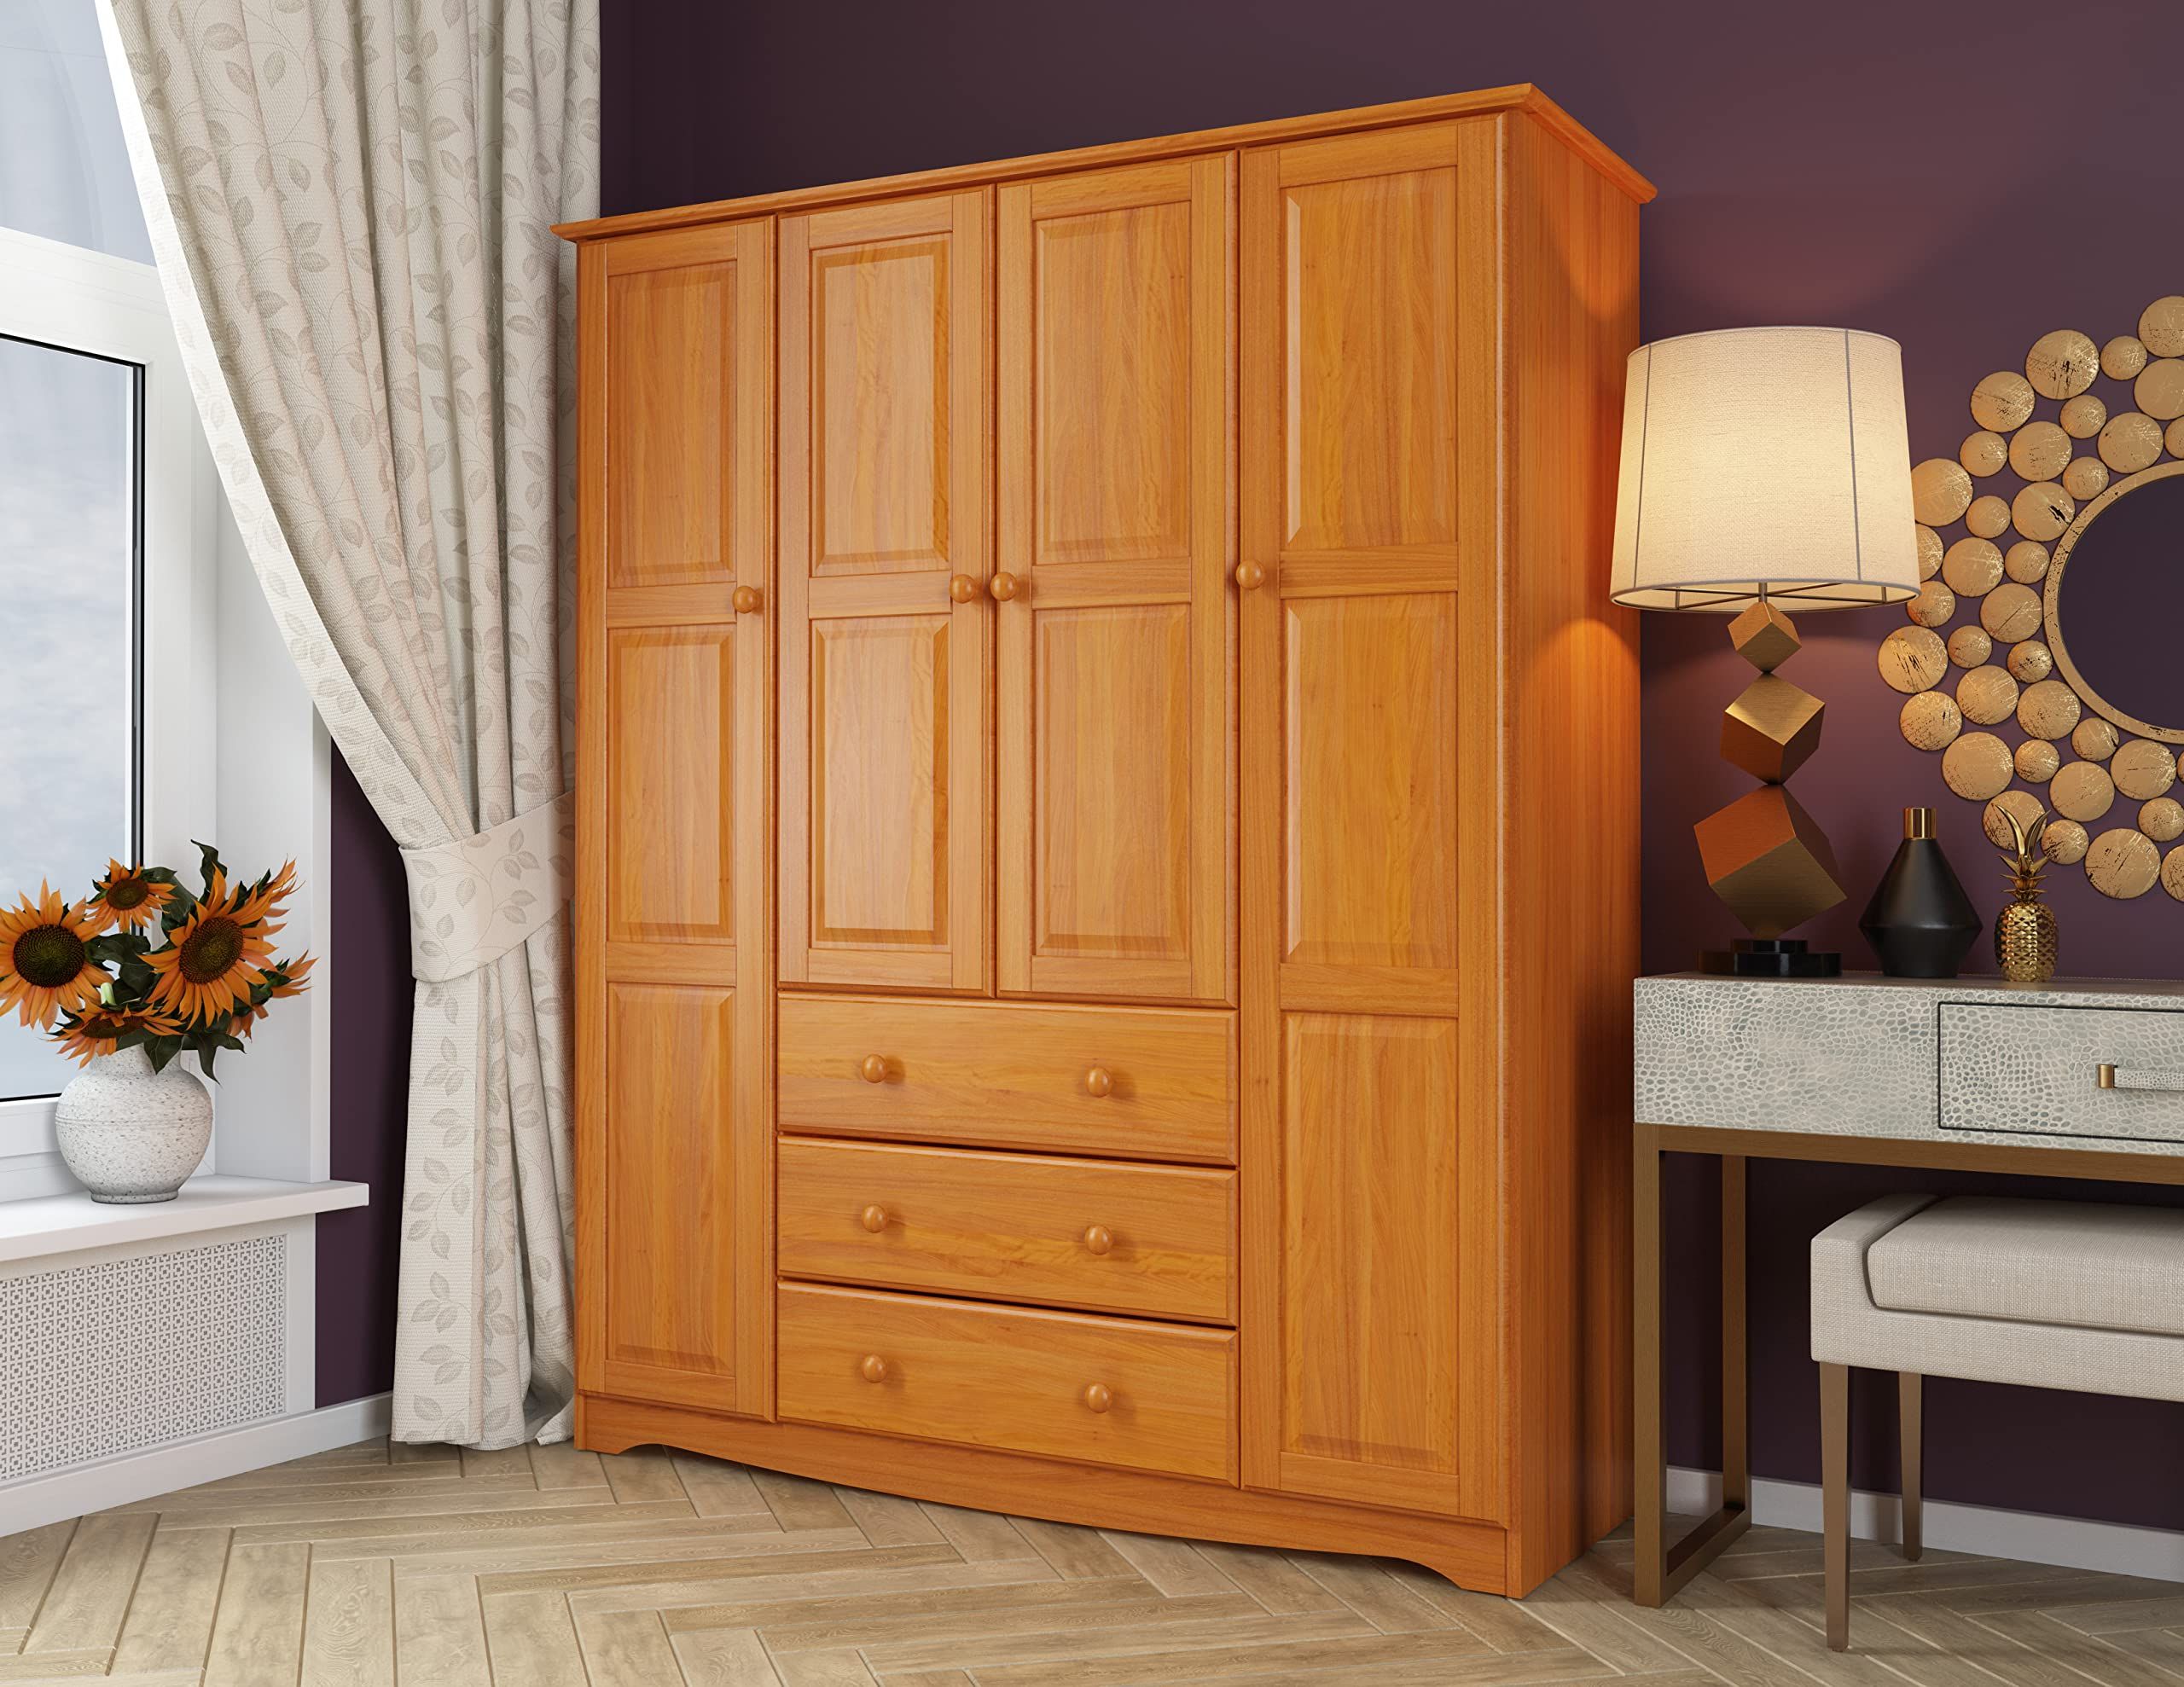 [%amazon: Palace Imports 100% Solid Wood Family Wardrobe/armoire/closet,  Honey Pine. 3 Clothing Rods Included. No Shelves Included. Optional Shelves  Sold Separately. 60.25" W X 72" H X 20.75" D : Home & Kitchen Within Well Known 60 Inch Wardrobes|60 Inch Wardrobes Pertaining To Well Known Amazon: Palace Imports 100% Solid Wood Family Wardrobe/armoire/closet,  Honey Pine. 3 Clothing Rods Included. No Shelves Included. Optional Shelves  Sold Separately. 60.25" W X 72" H X 20.75" D : Home & Kitchen|2017 60 Inch Wardrobes Within Amazon: Palace Imports 100% Solid Wood Family Wardrobe/armoire/closet,  Honey Pine. 3 Clothing Rods Included. No Shelves Included. Optional Shelves  Sold Separately. 60.25" W X 72" H X 20.75" D : Home & Kitchen|2018 Amazon: Palace Imports 100% Solid Wood Family Wardrobe/armoire/closet,  Honey Pine. 3 Clothing Rods Included. No Shelves Included. Optional Shelves  Sold Separately. 60.25" W X 72" H X 20.75" D : Home & Kitchen With Regard To 60 Inch Wardrobes%] (Photo 3 of 10)